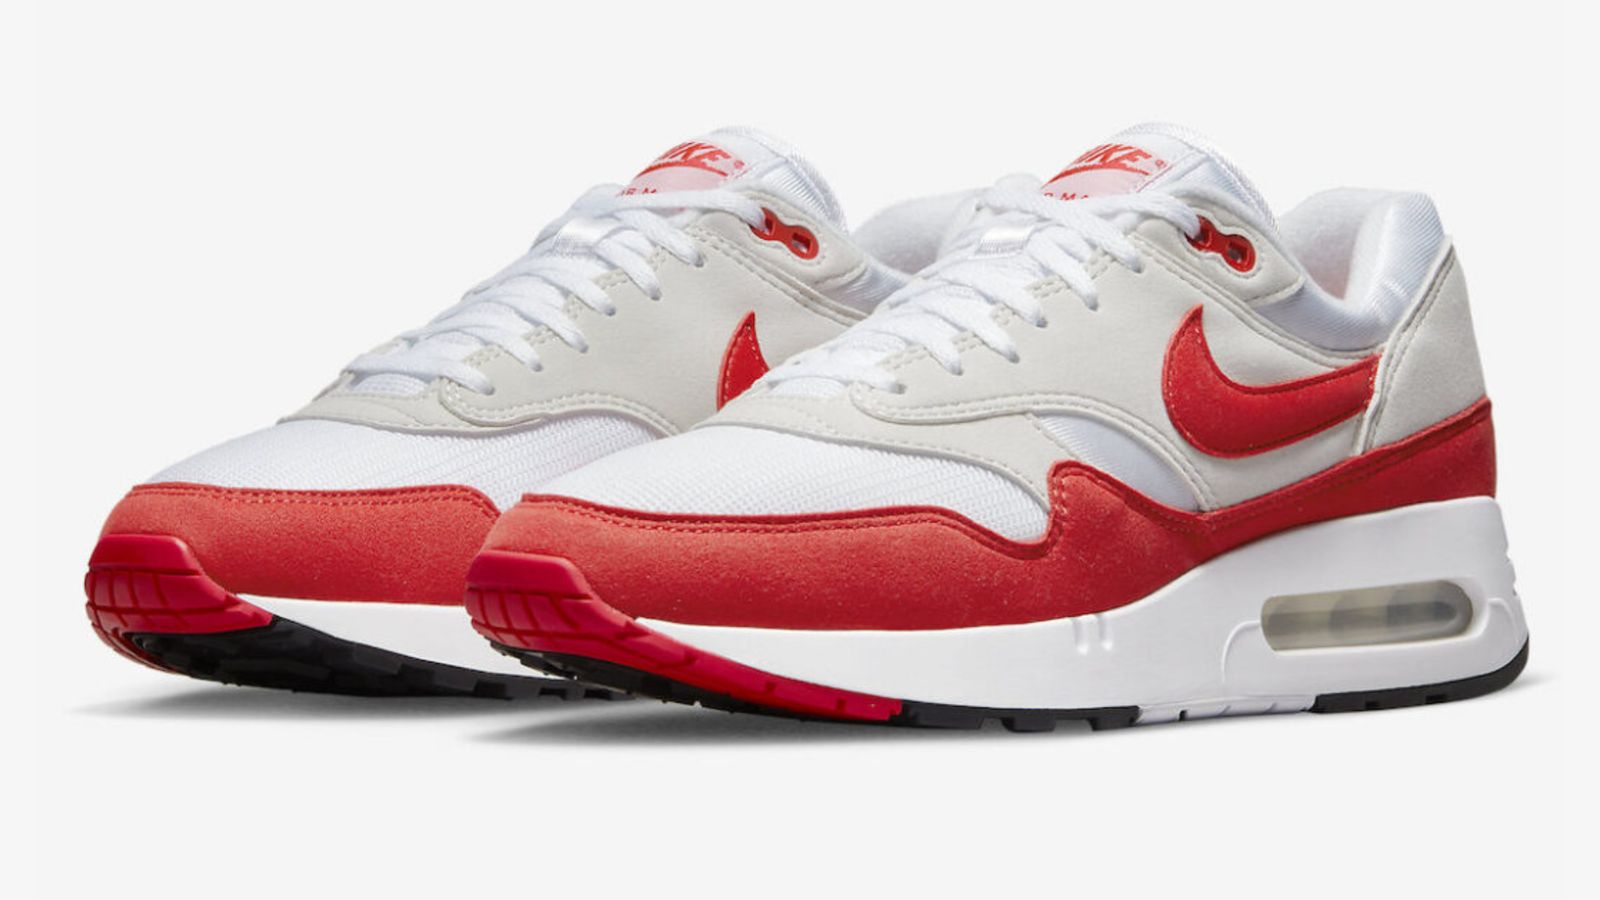 Air Max Day 2023 - Nike Air Max 1 "Big Bubble" product image of a white and red sneaker.